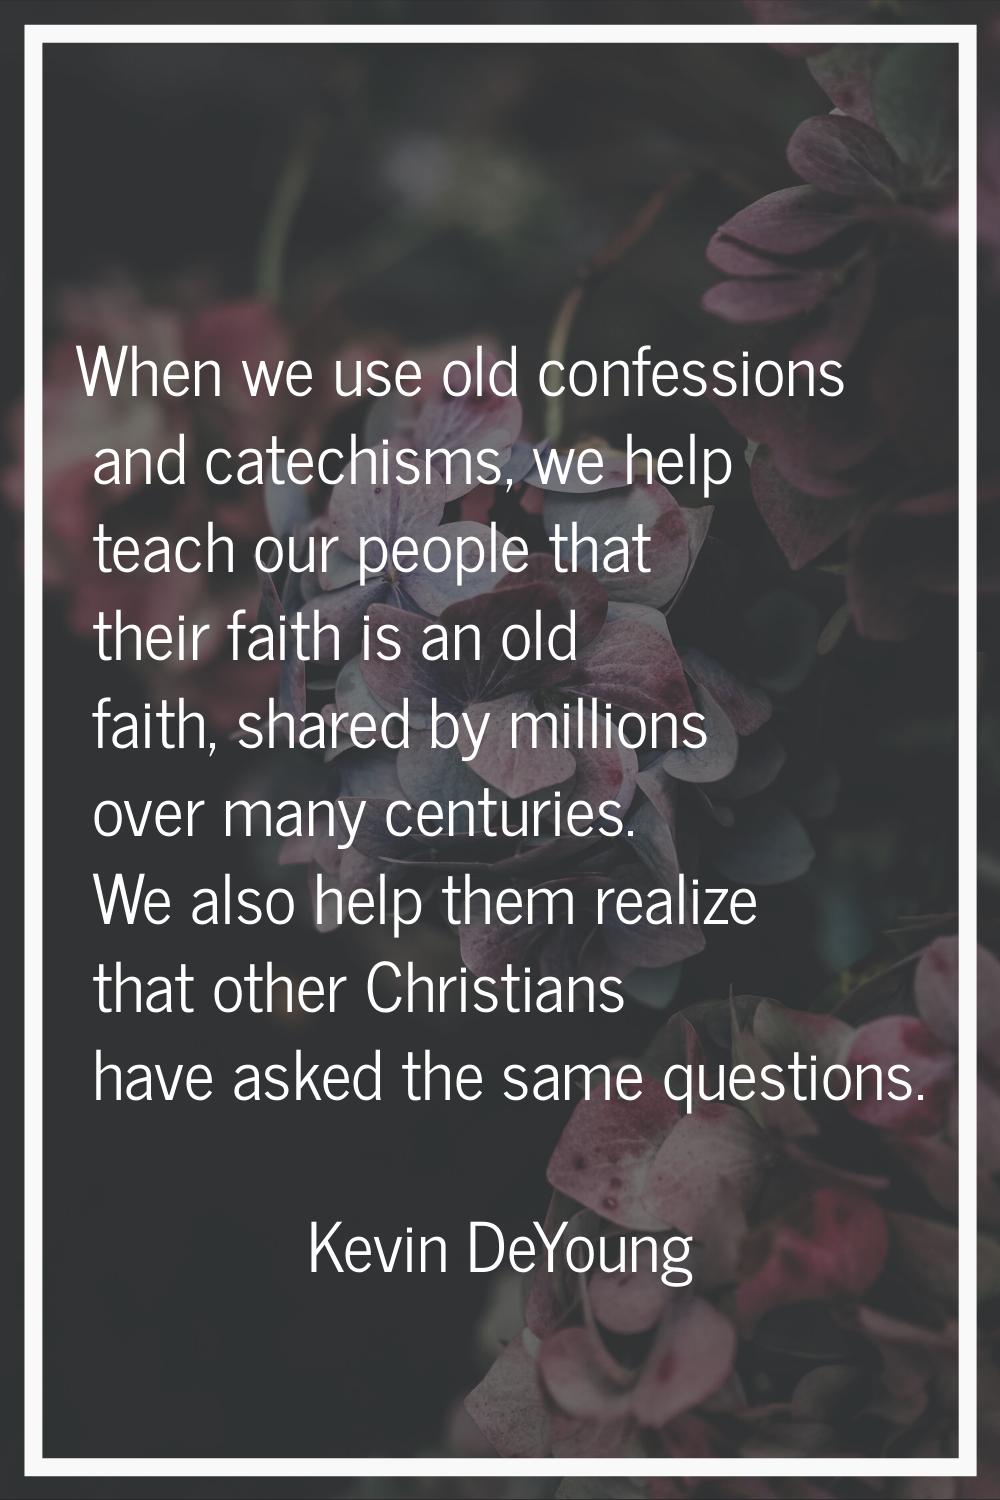 When we use old confessions and catechisms, we help teach our people that their faith is an old fai